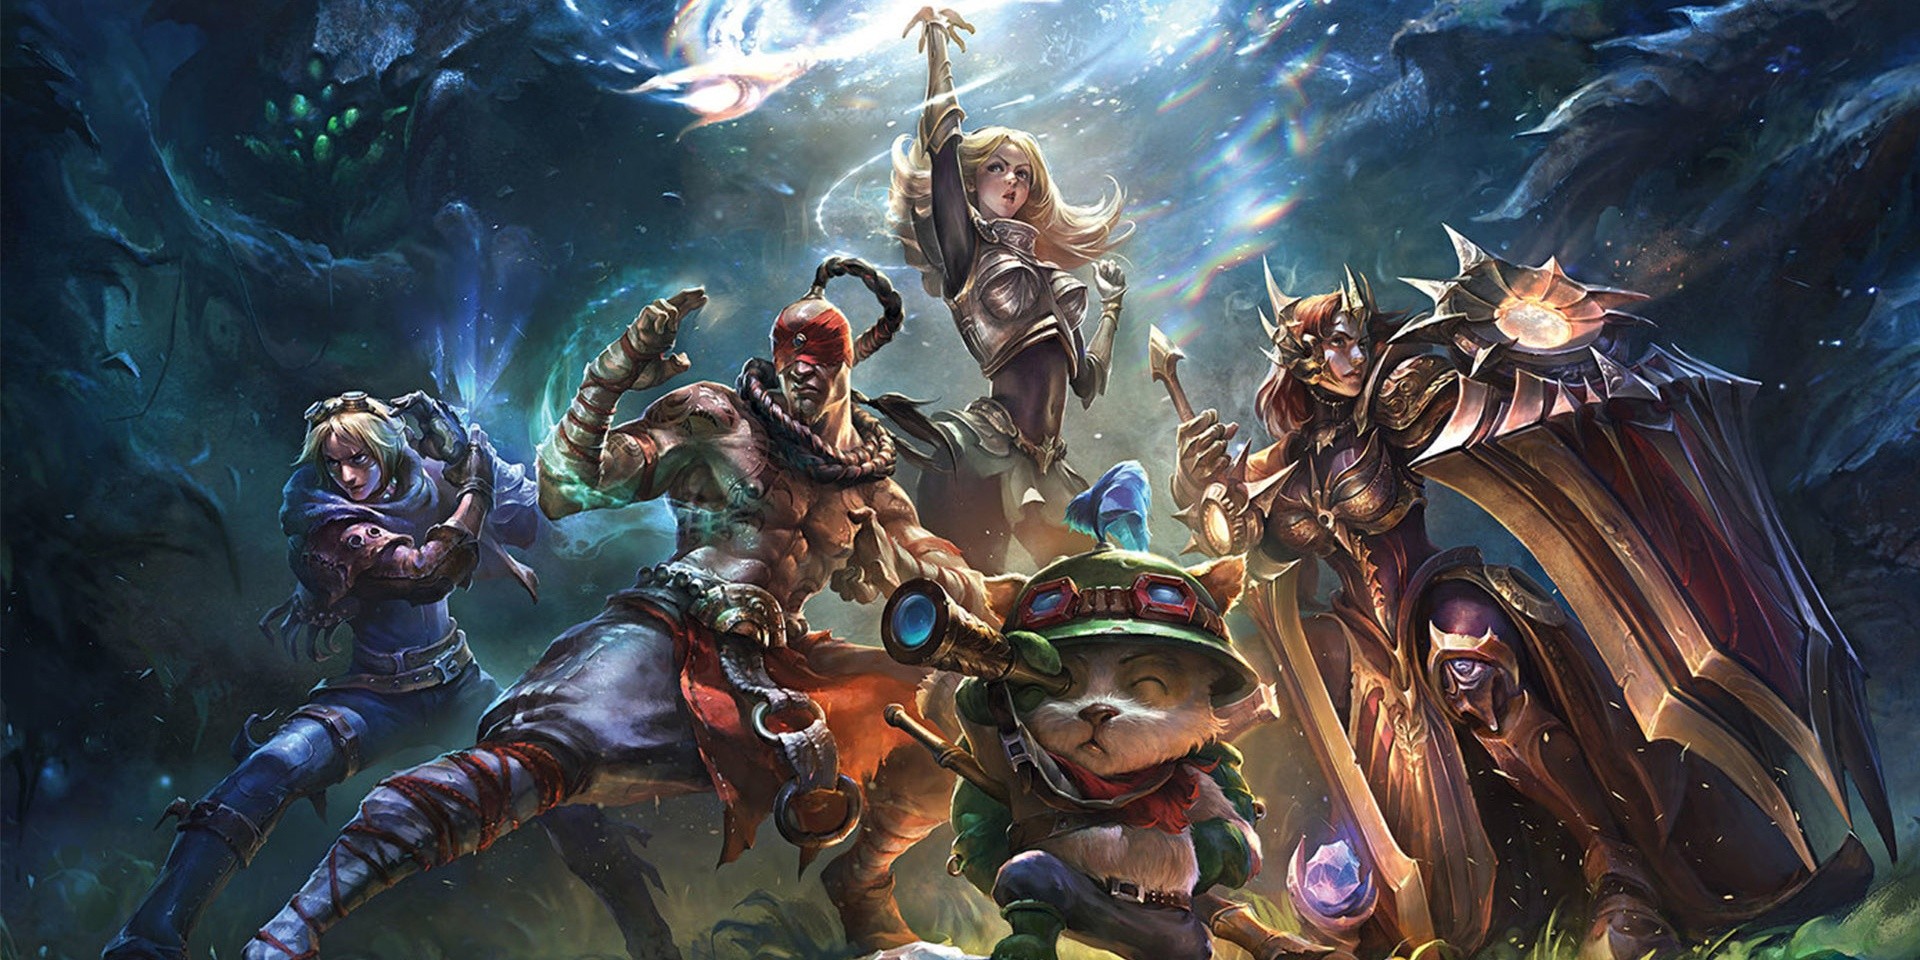 Discover your gaming archetype with League of Legends and Spotify's new digital experience